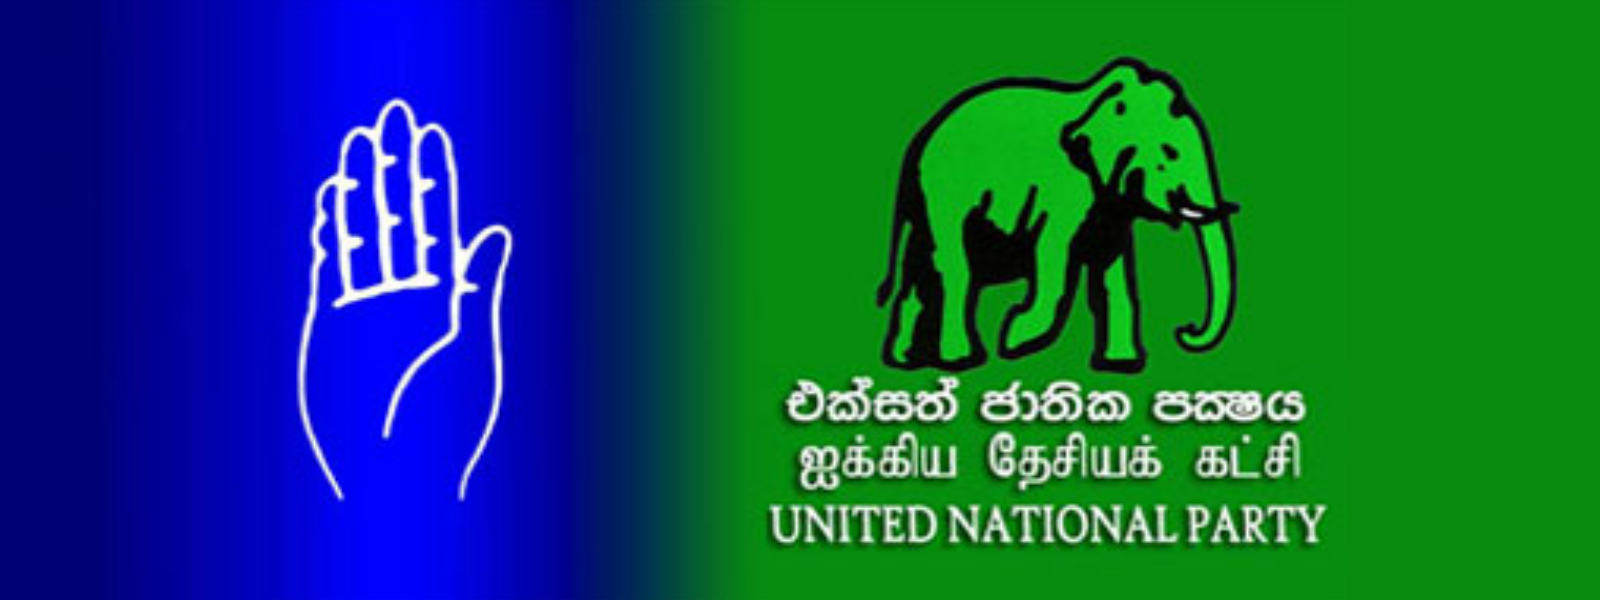 SLFP and UNP to host meetings on party reforms